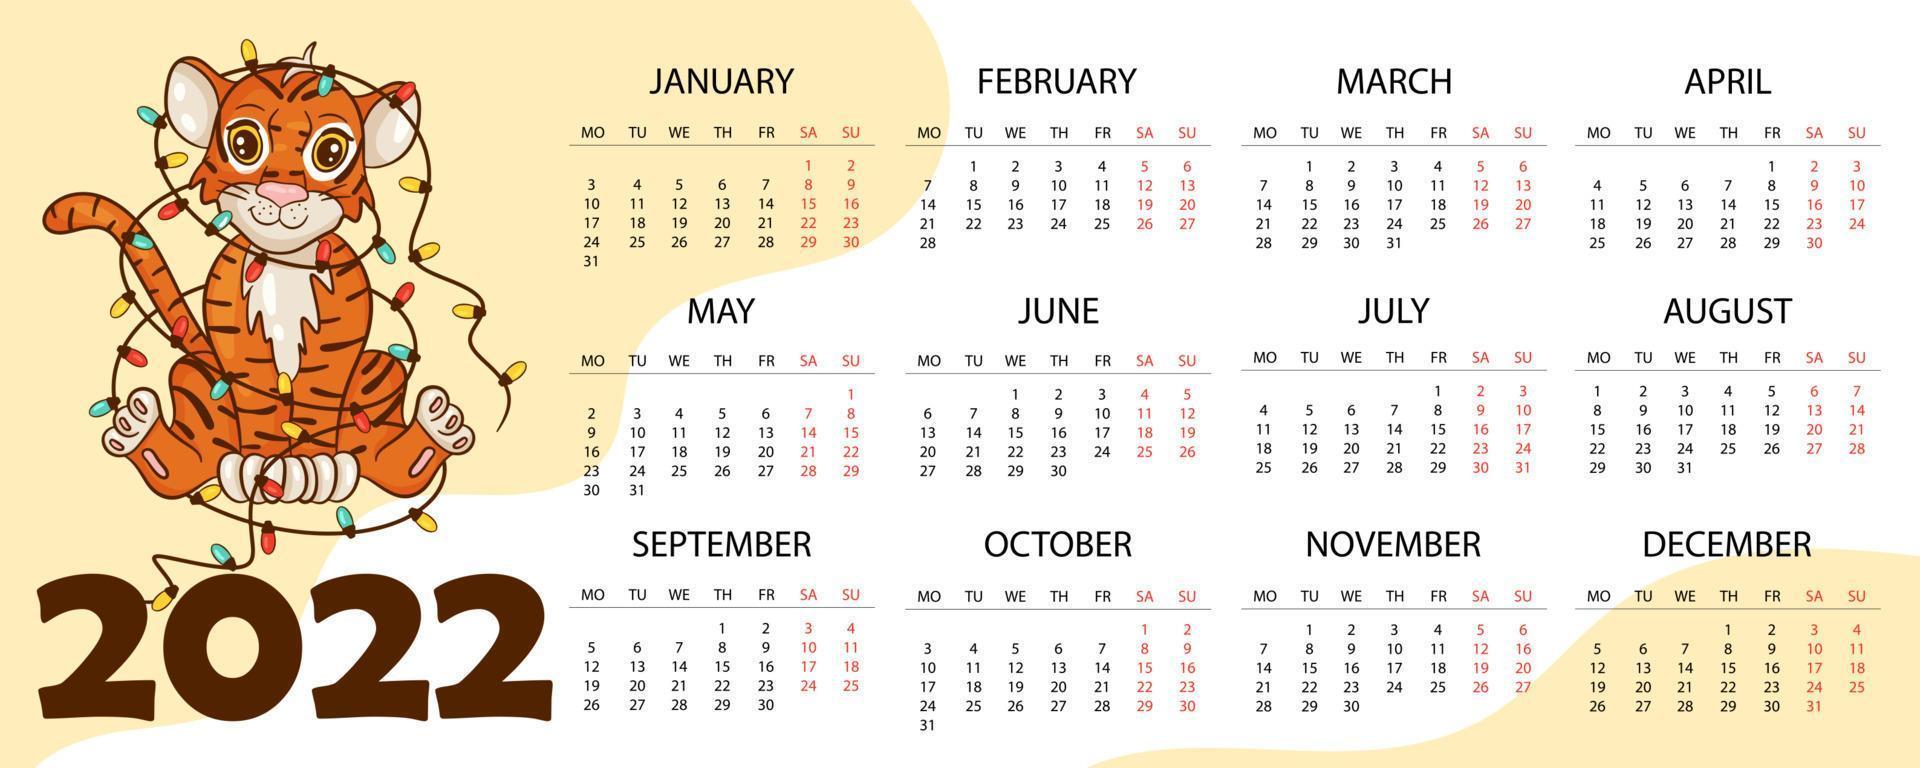 Calendar design template for 2022, the year of the tiger according to the Chinese or Eastern calendar, with an illustration of the tiger. Horizontal table with calendar for 2022. Vector